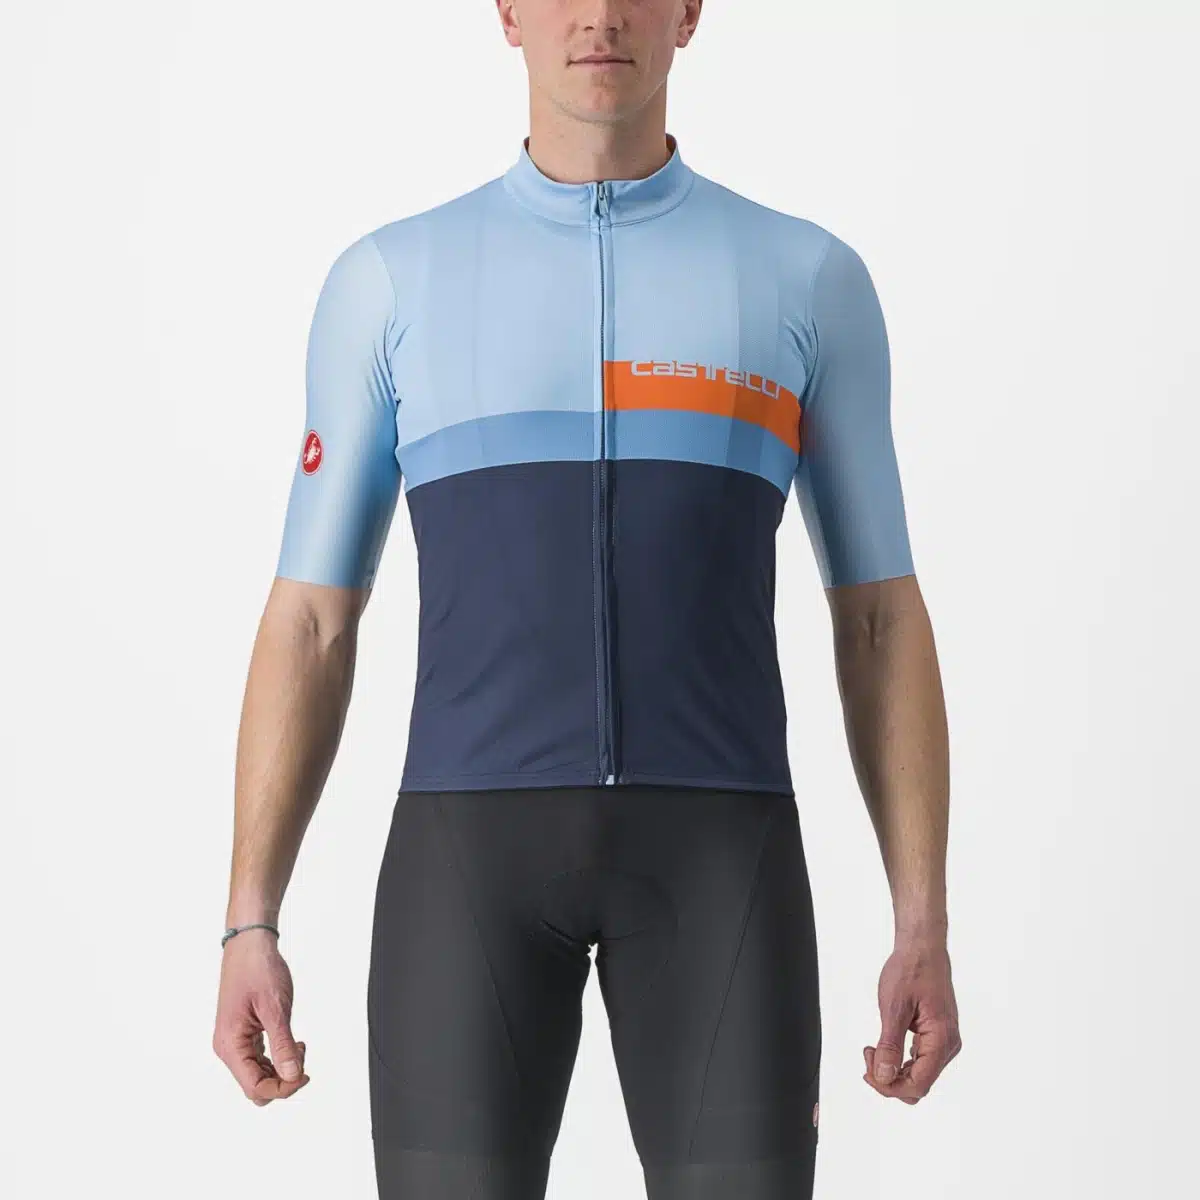 Castelli A Blocco Jersey baby blue